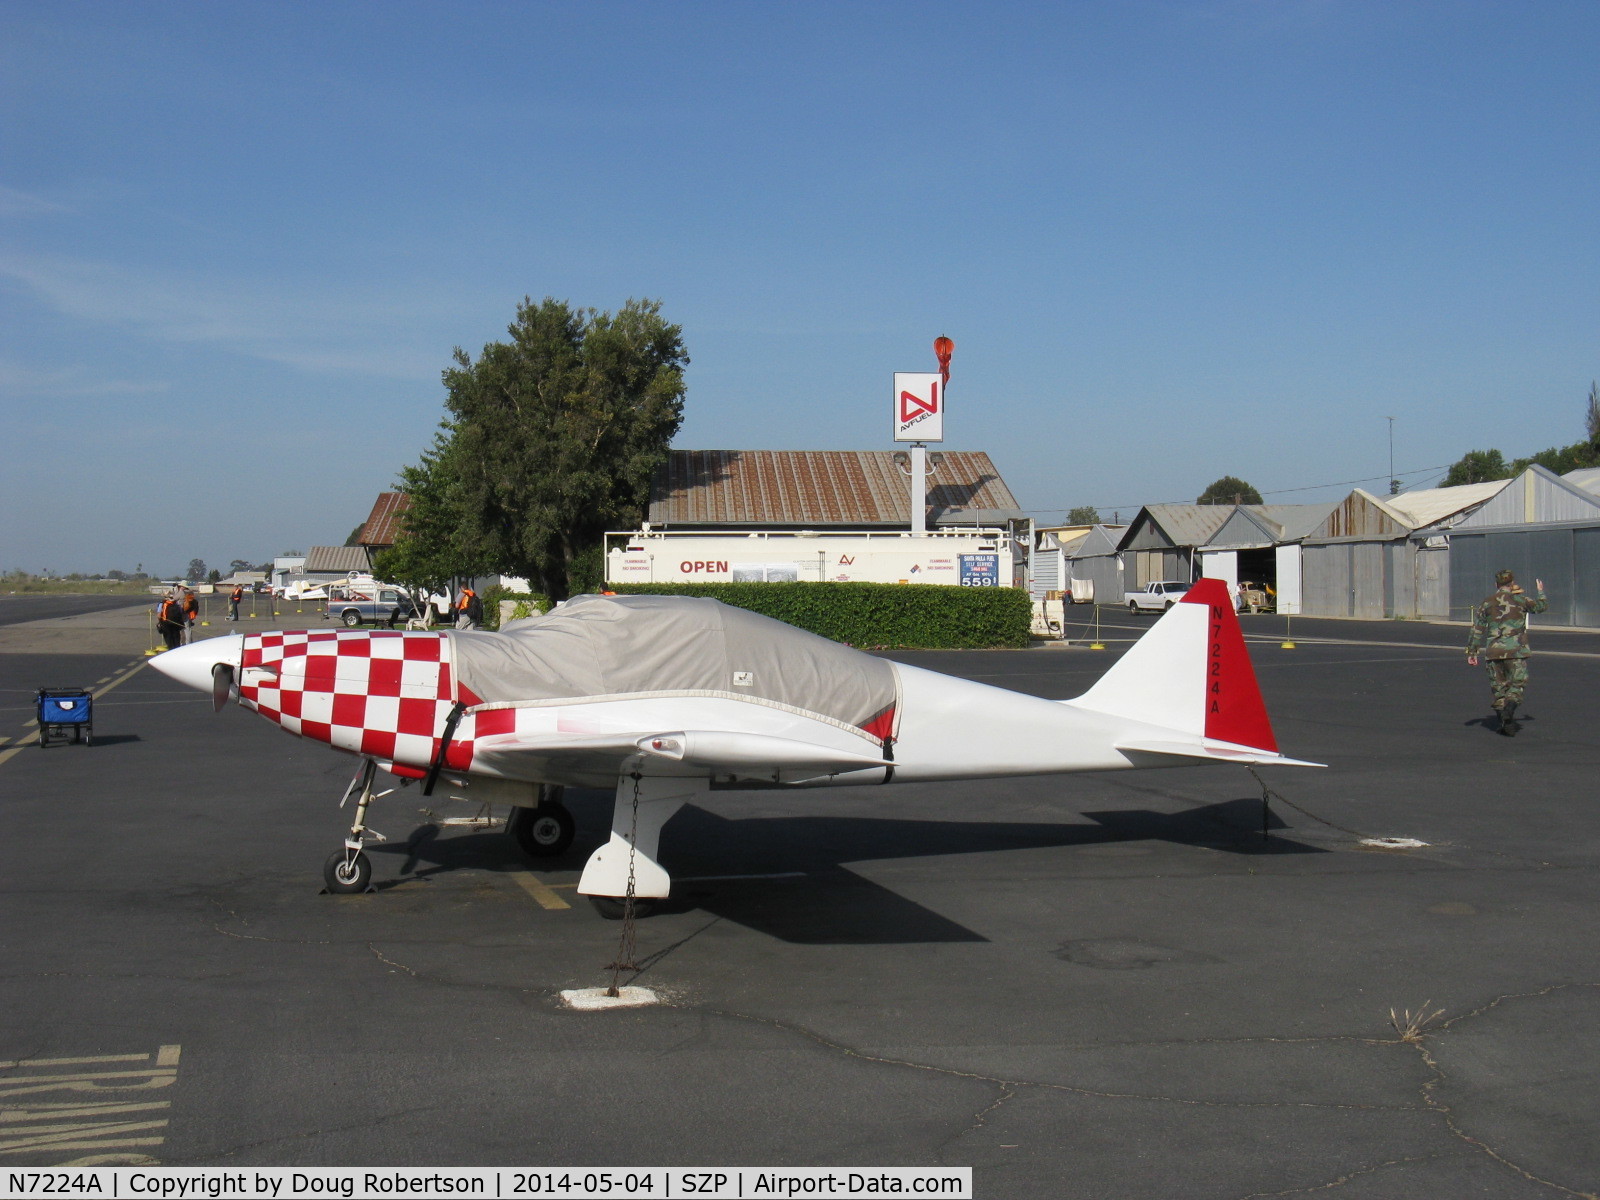 N7224A, 1998 Osprey GP-4 C/N 8, 1998 Baum PEREIRA GP4, Lycoming IO-360-A1A 210 Hp, rare wood plans-built speedster, 240 mph cruise, 2,200 fpm climb rate, 1,200 mile range, two-place, retractable tri-gear